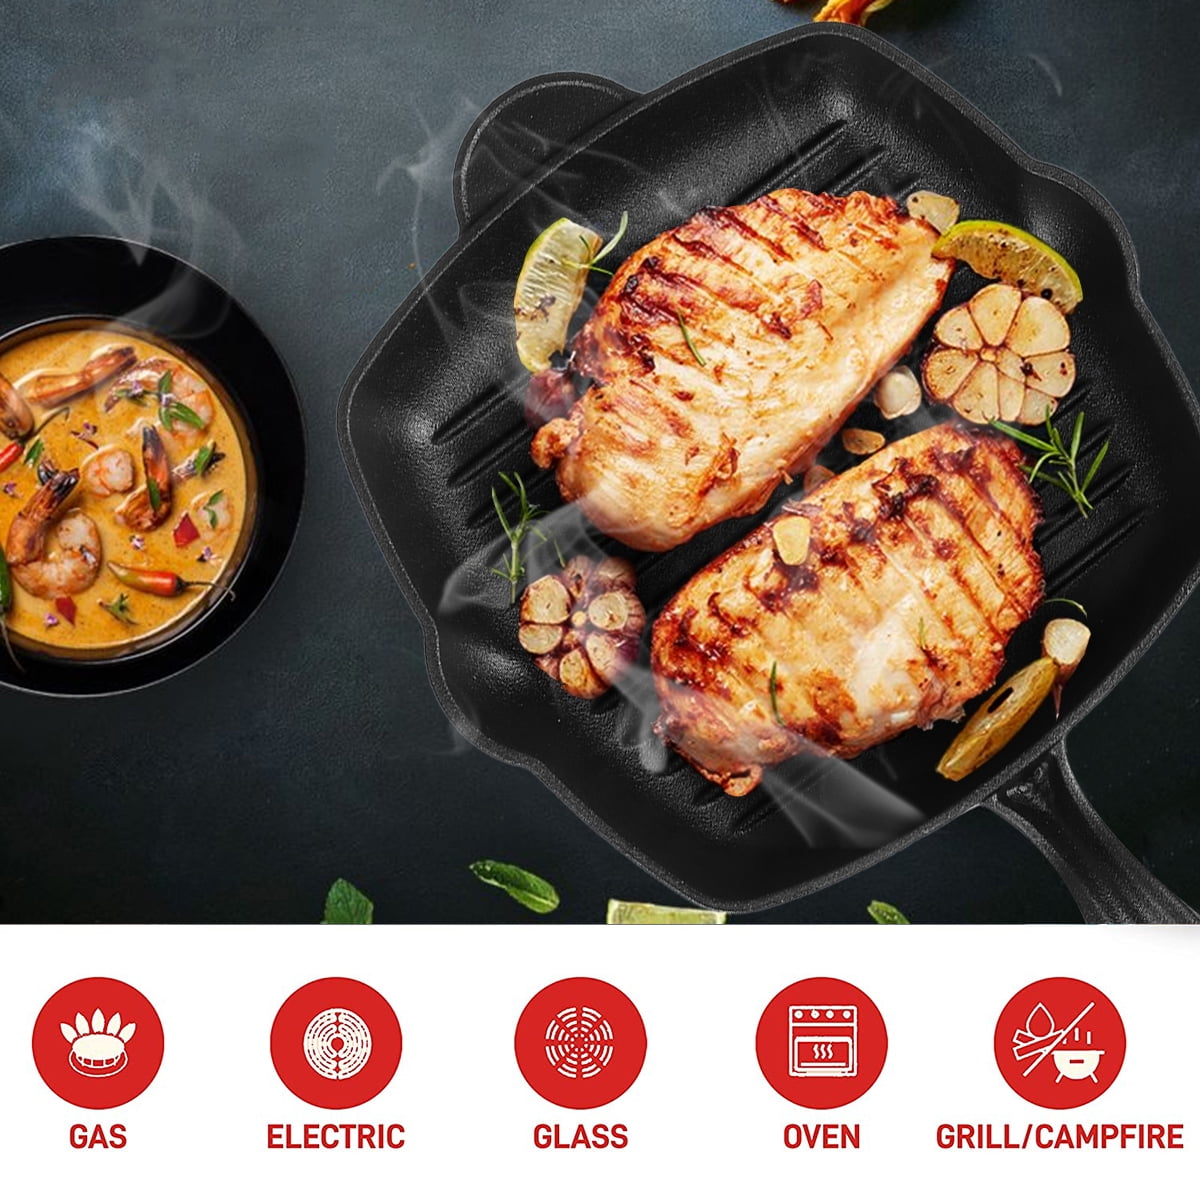 8 Square Cast Iron Grill Skillet with Handle (1 Skillet) by MyXOHome, 1 -  Fry's Food Stores